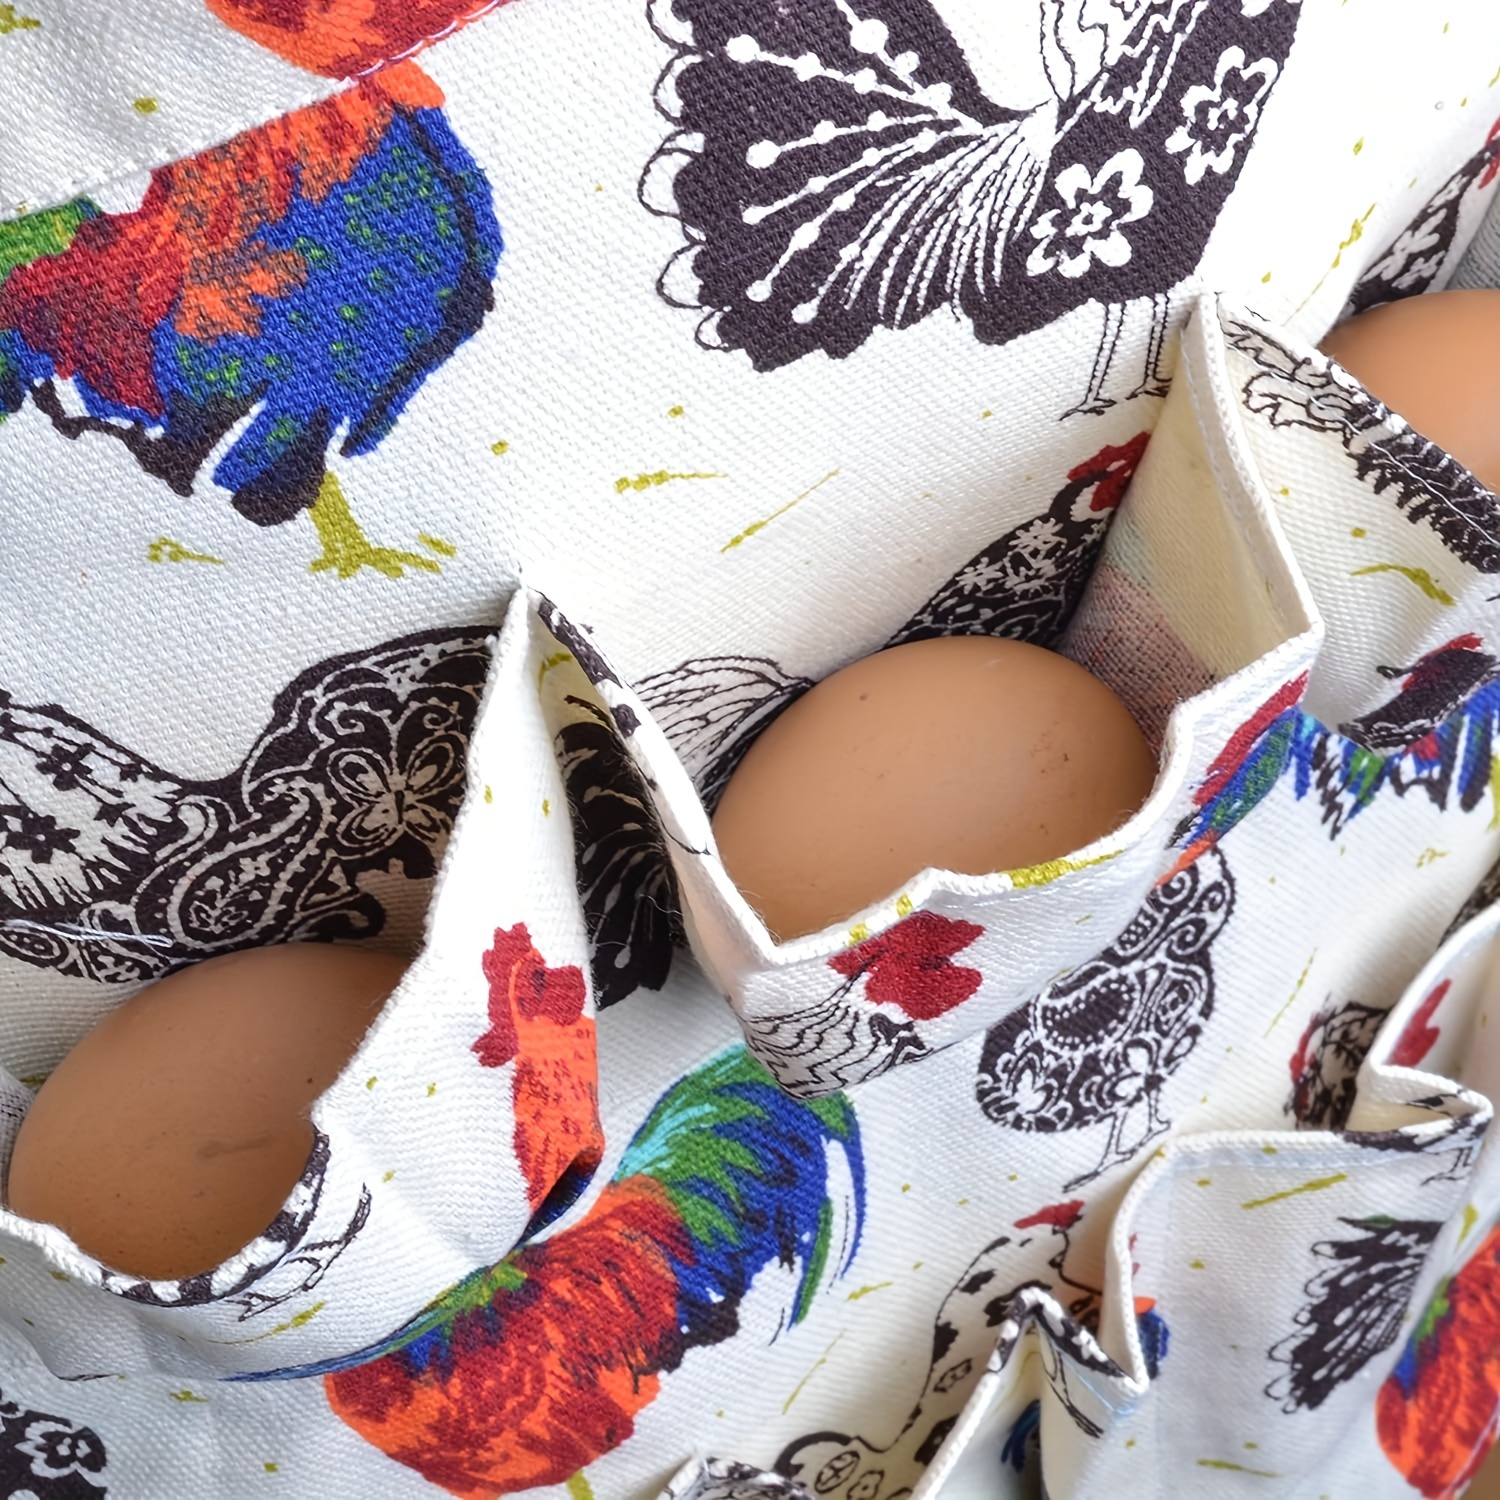 Backyard Barnyard 12 Pocket Soft Durable Denim Egg Gathering Apron FREE  RUSTIC GIFT BAG INCLUDED! Collecting Chicken Duck Quail Poultry Eggs